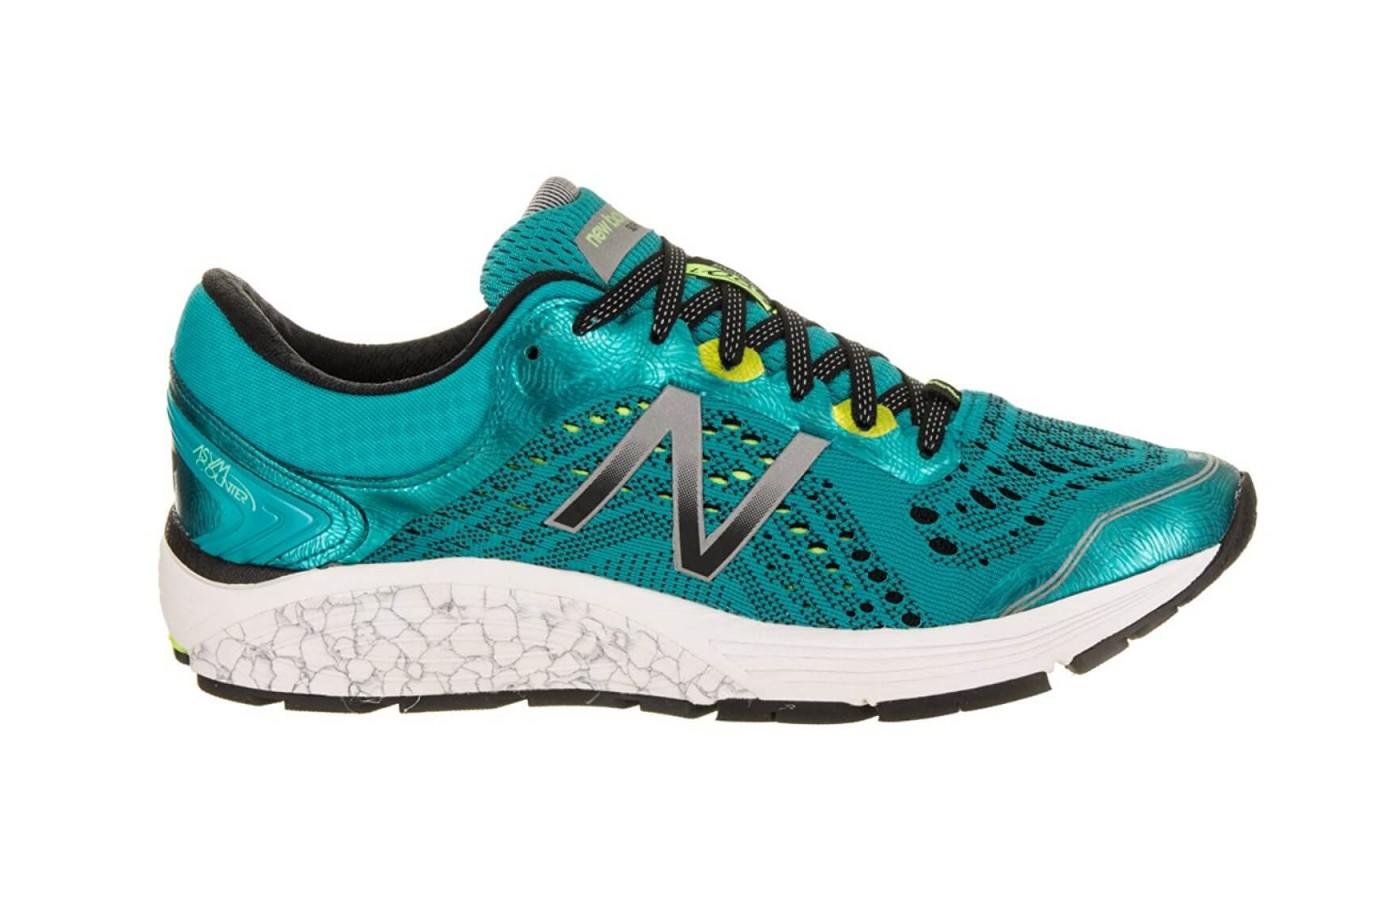 The 1260 V7 offers a comfortable, breathable ride for runners. 